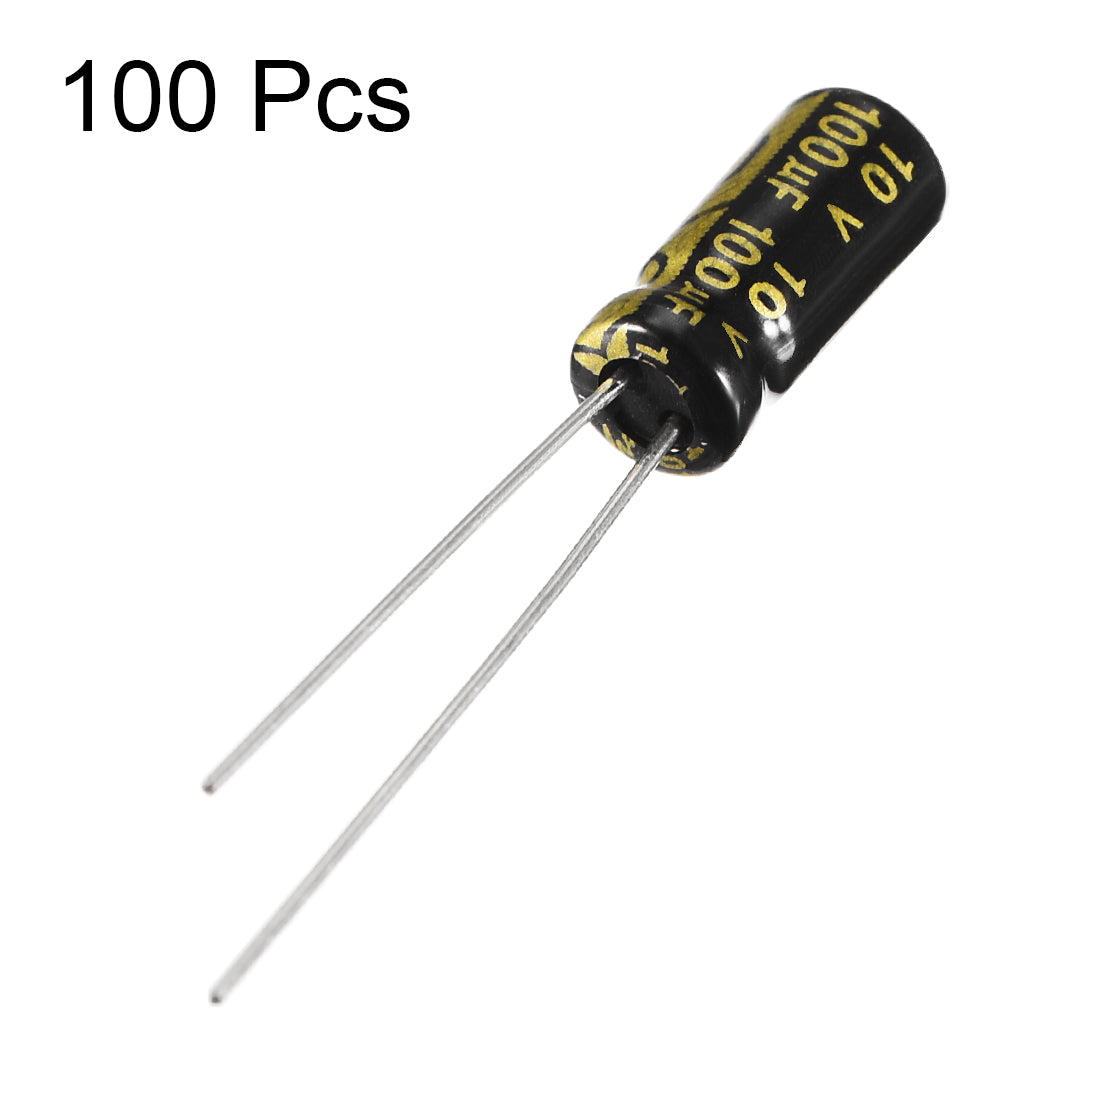 uxcell Uxcell Aluminum Radial Electrolytic Capacitor with 100uF 10V 105 Celsius Life 2000H 5 x 11 mm Black 100pcs